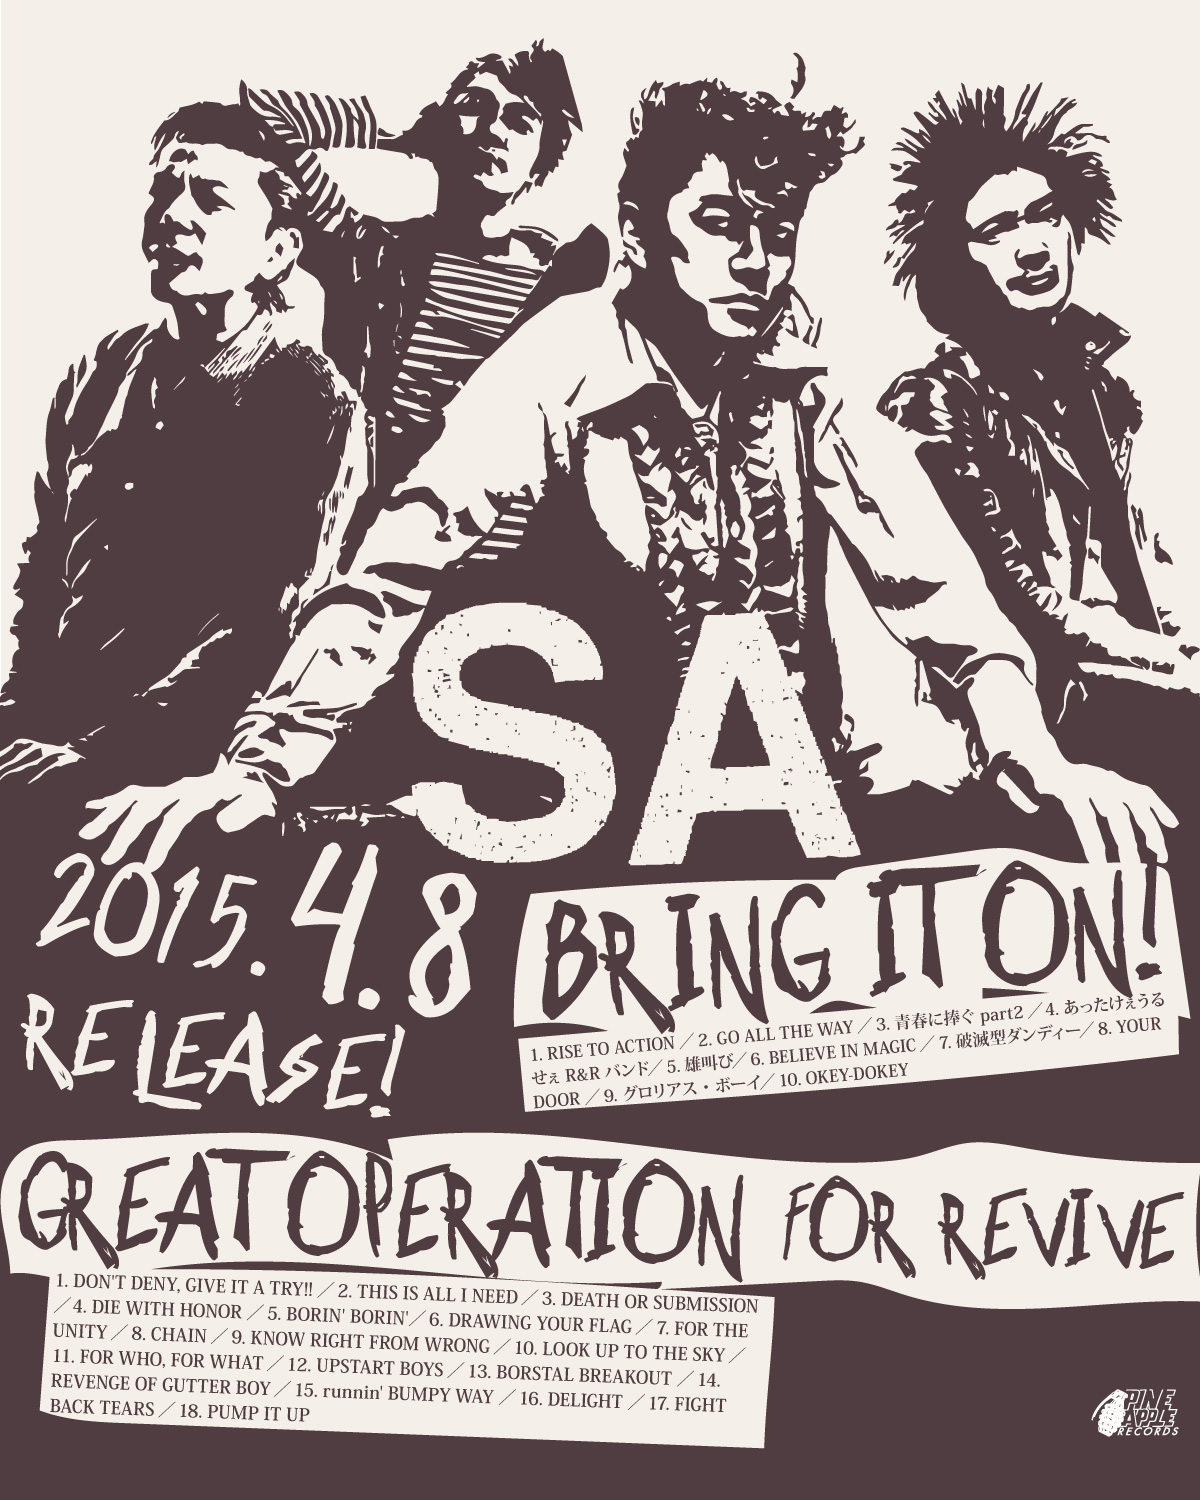 SA『BRING IT ON!』『GREAT OPERATION FOR REVIVE』2015.4.8 RELEASE!